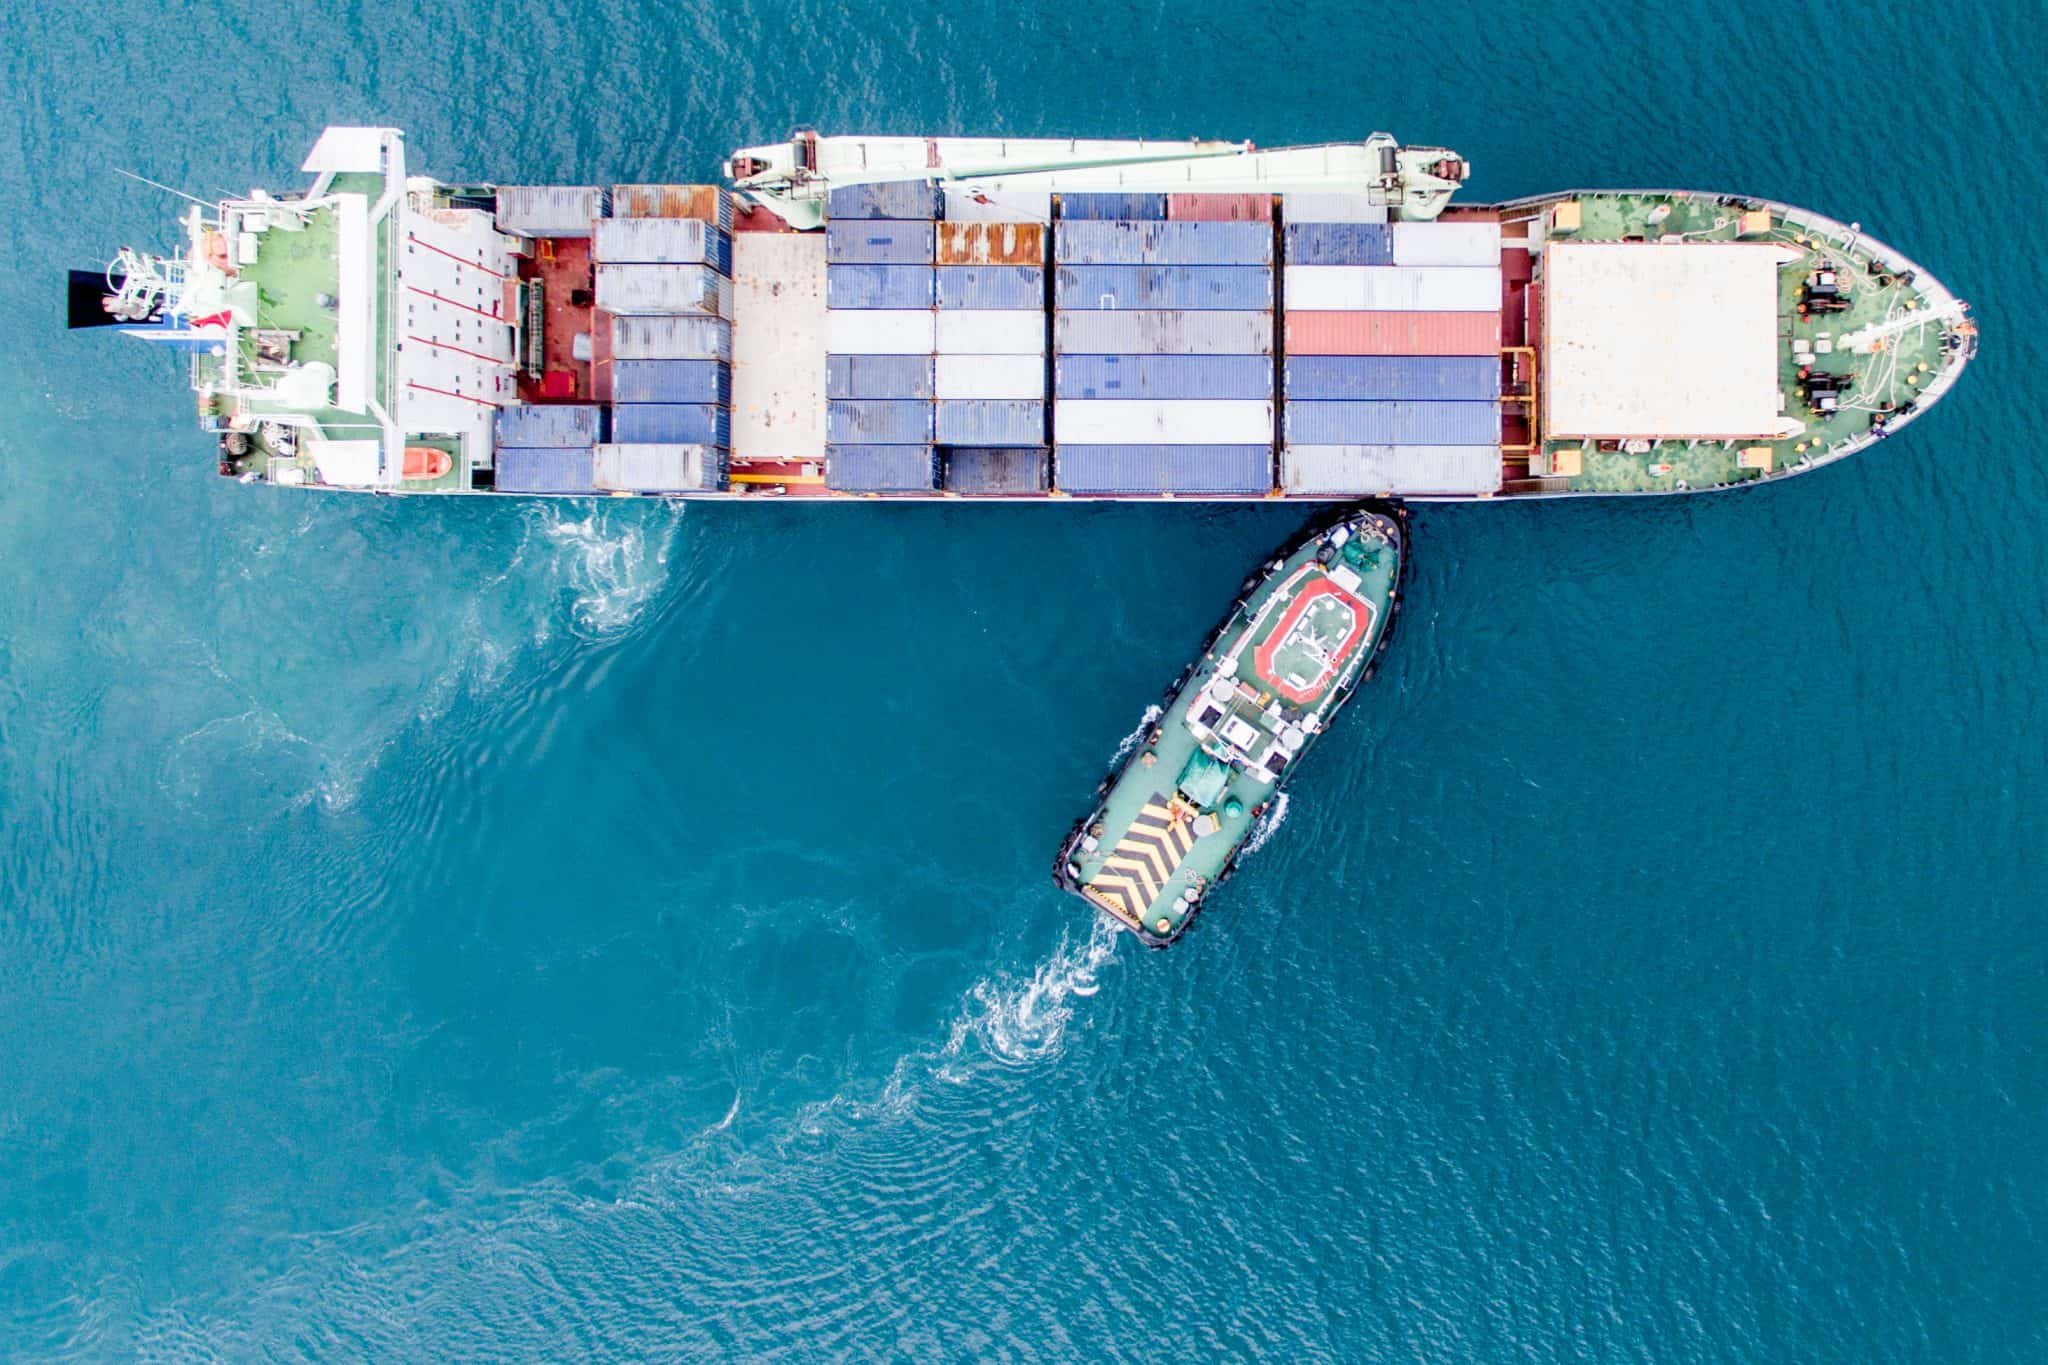 Aerial Photography of Container Ship and Tug Boat